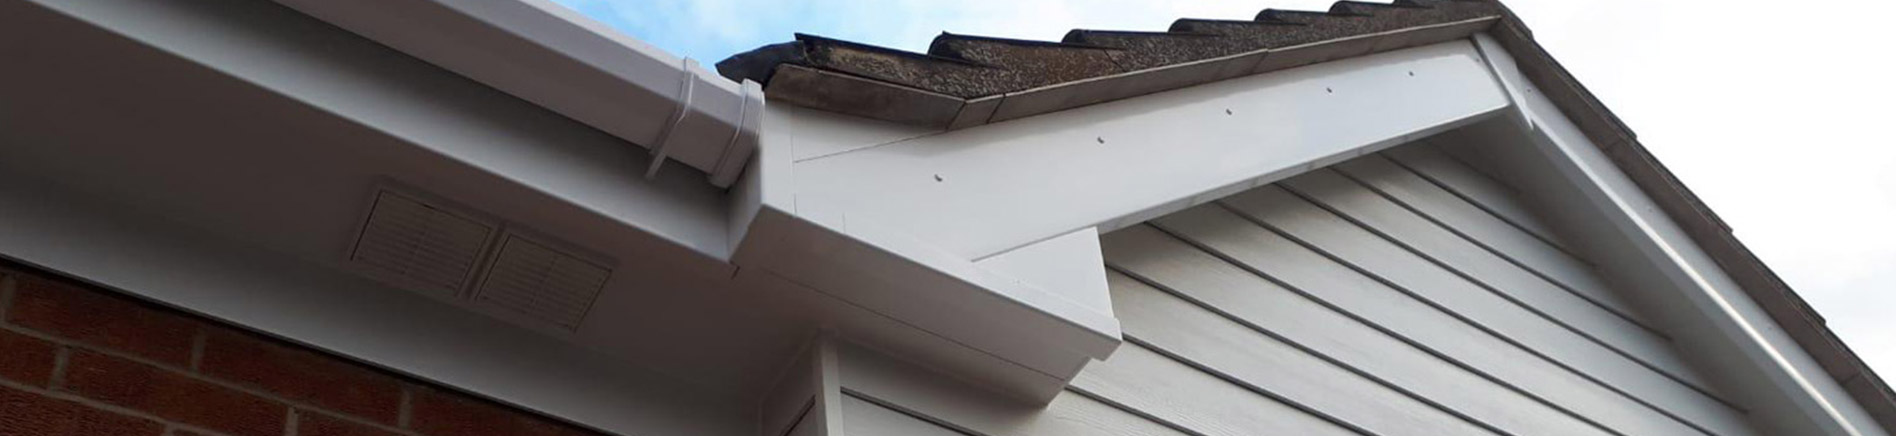 Fascia and soffit UPVC